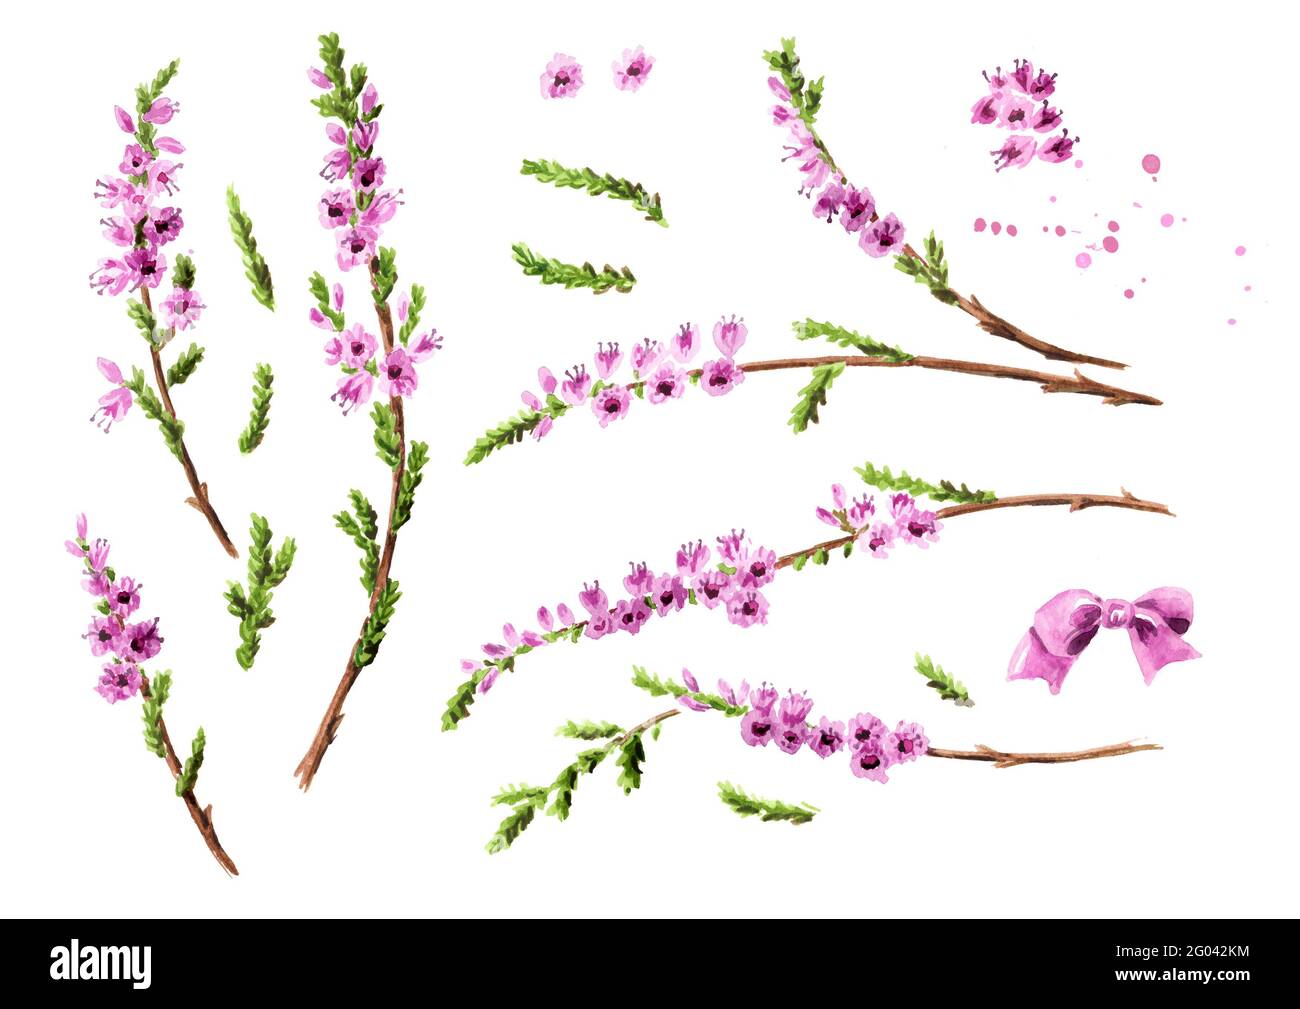 Heather set with purple flowers, symbol of good luck. Watercolor hand drawn illustration isolated on white background Stock Photo